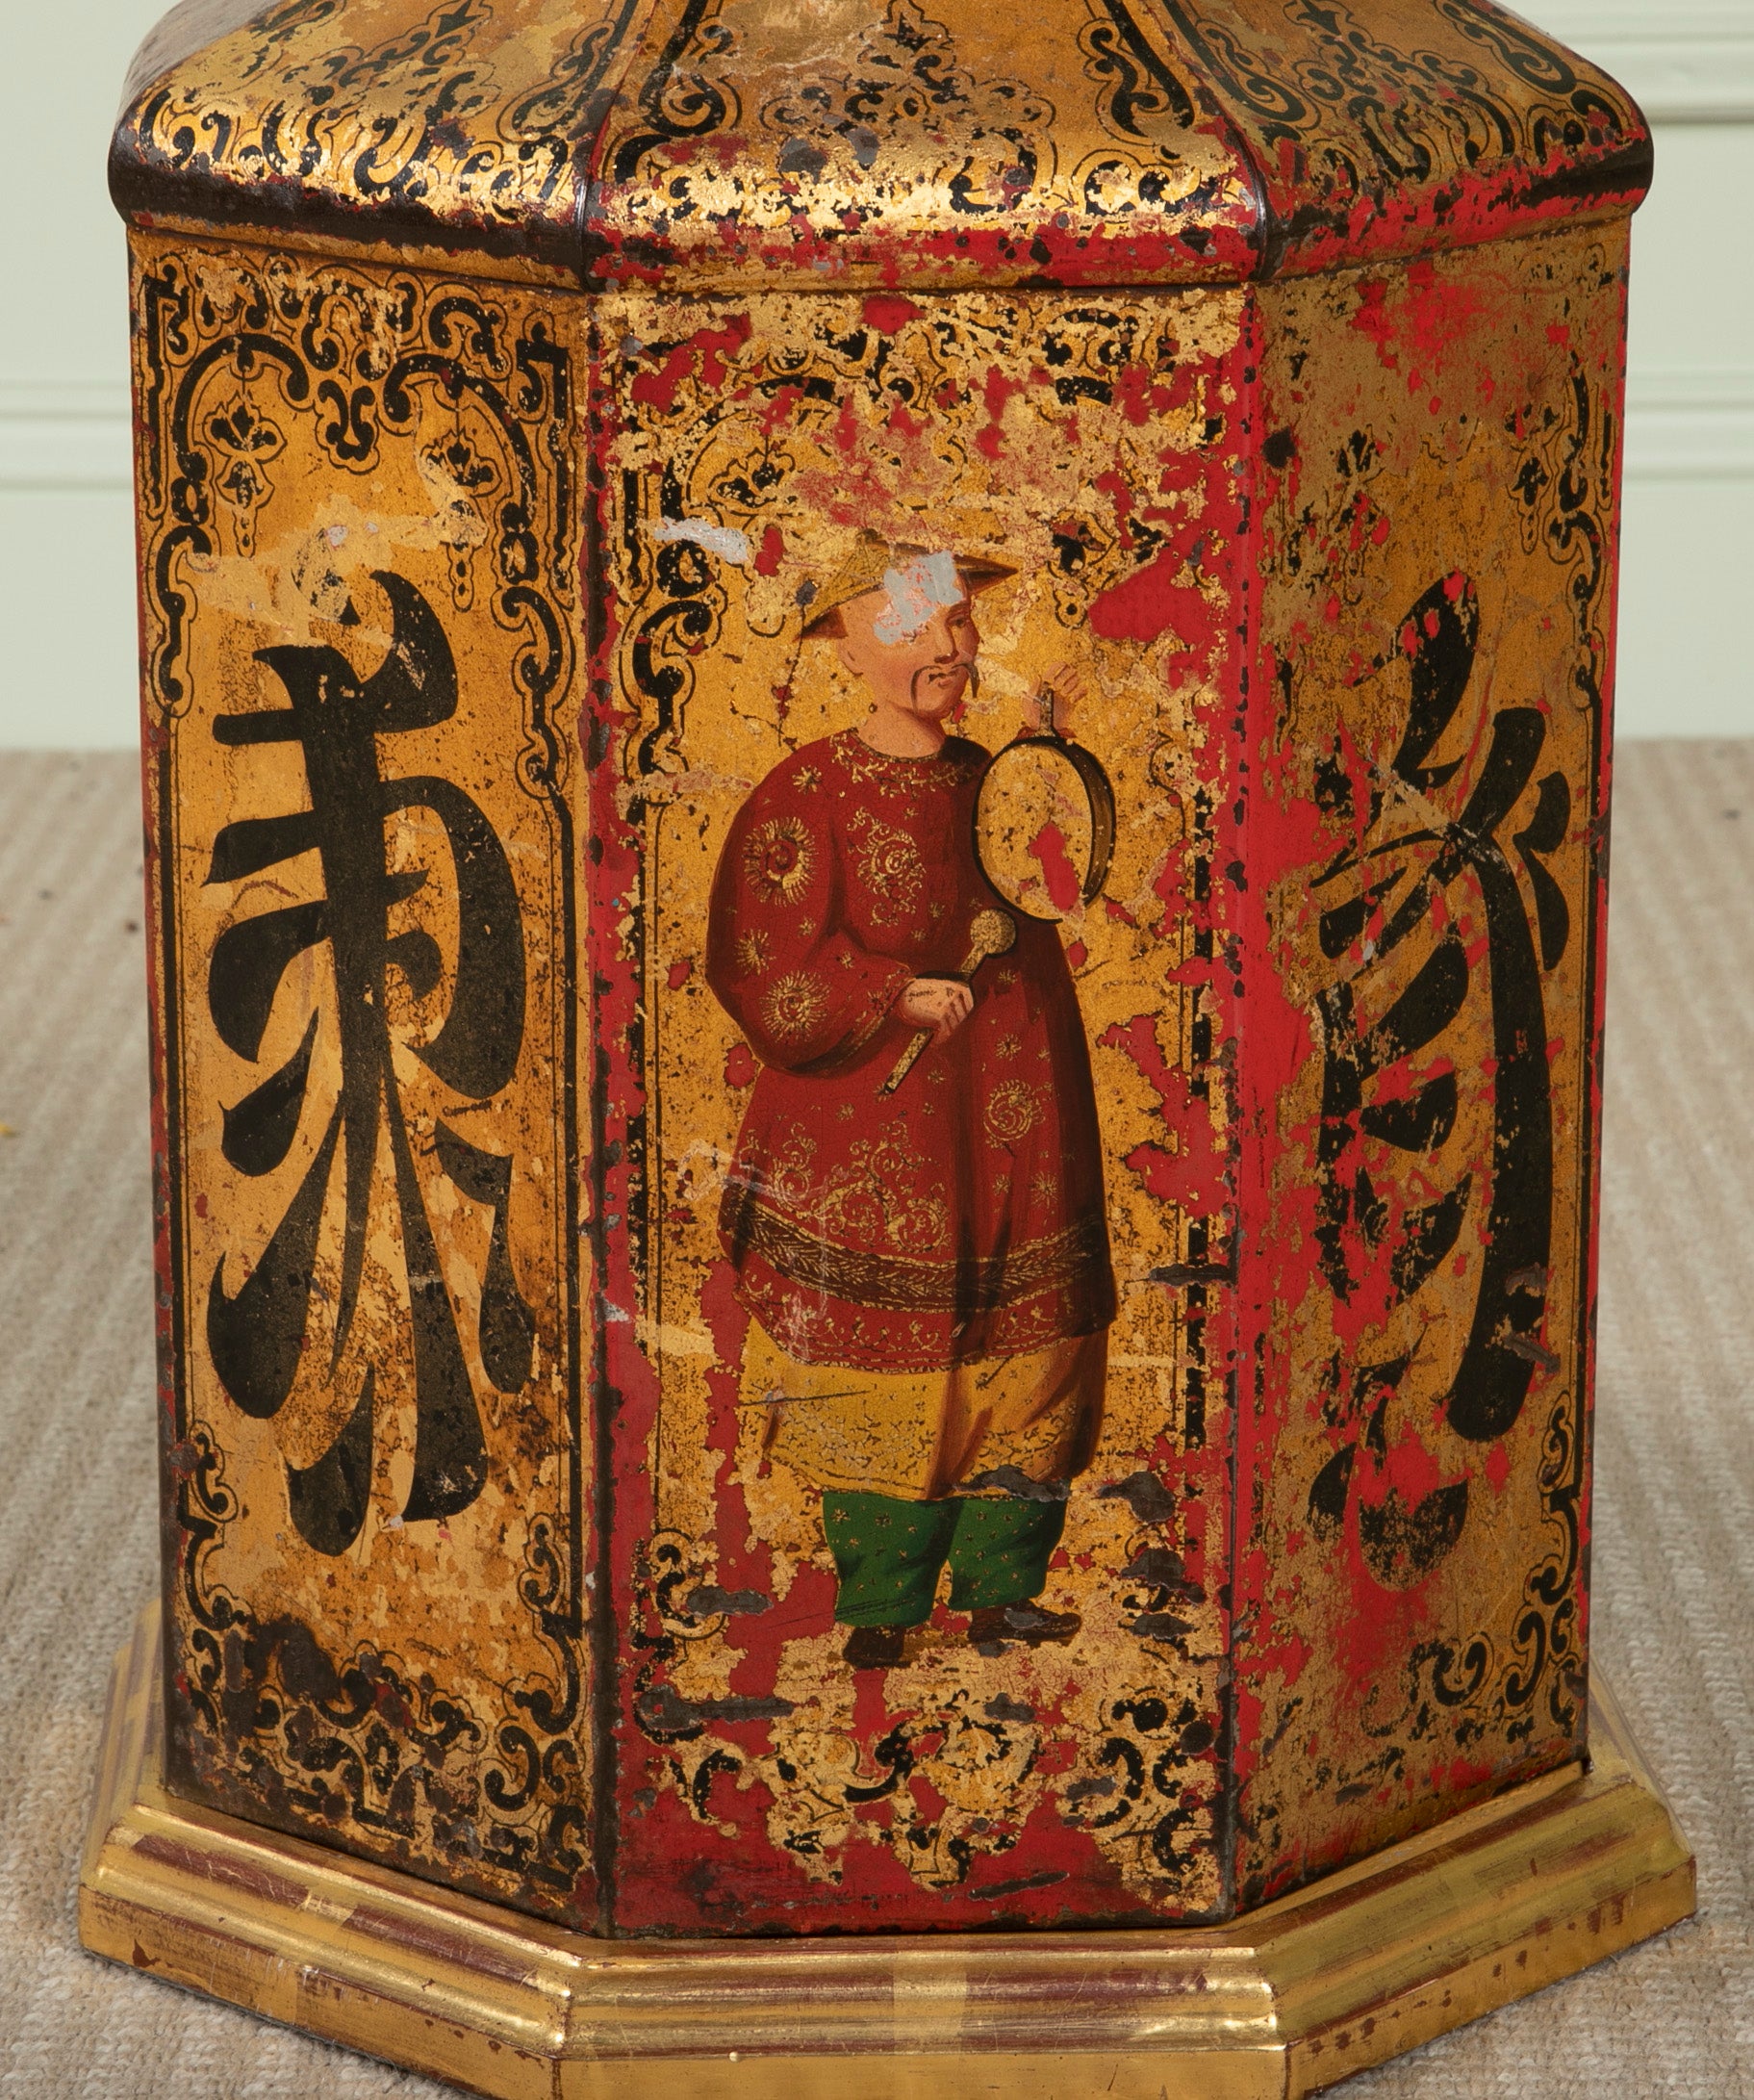 A Chinese Black & Gilt on Red Decorated Tole Octagonal Cannister with Figure